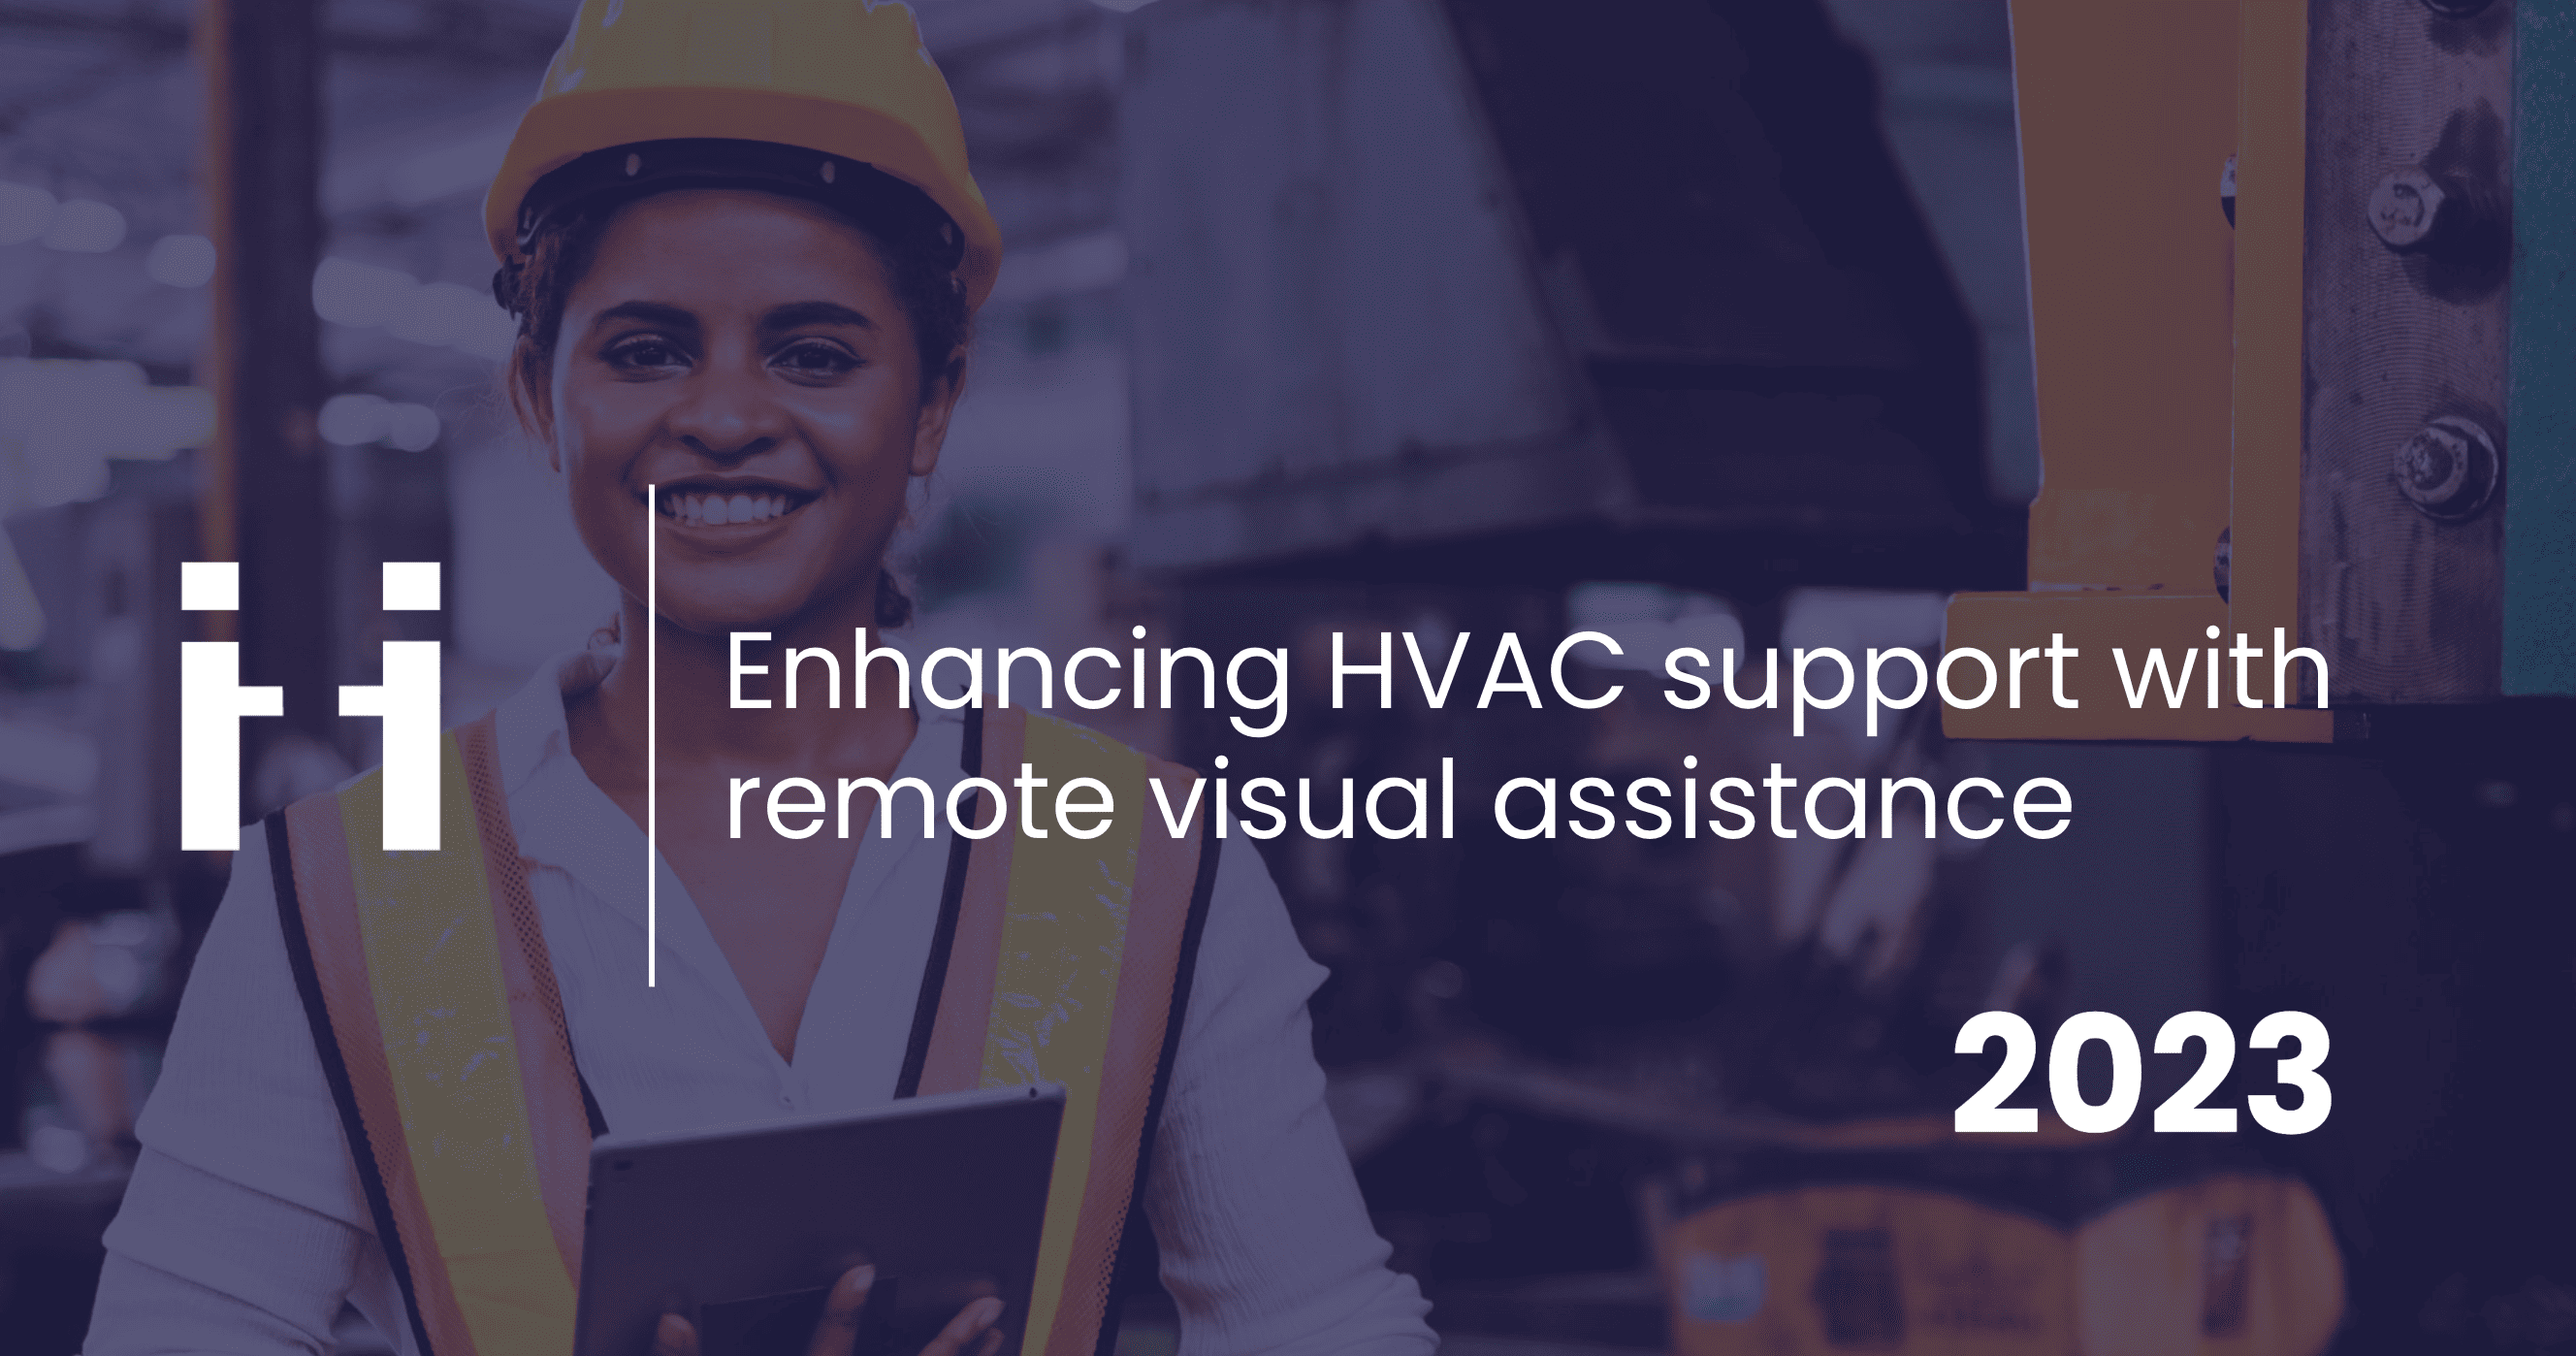 hvac support with remote visual assistance